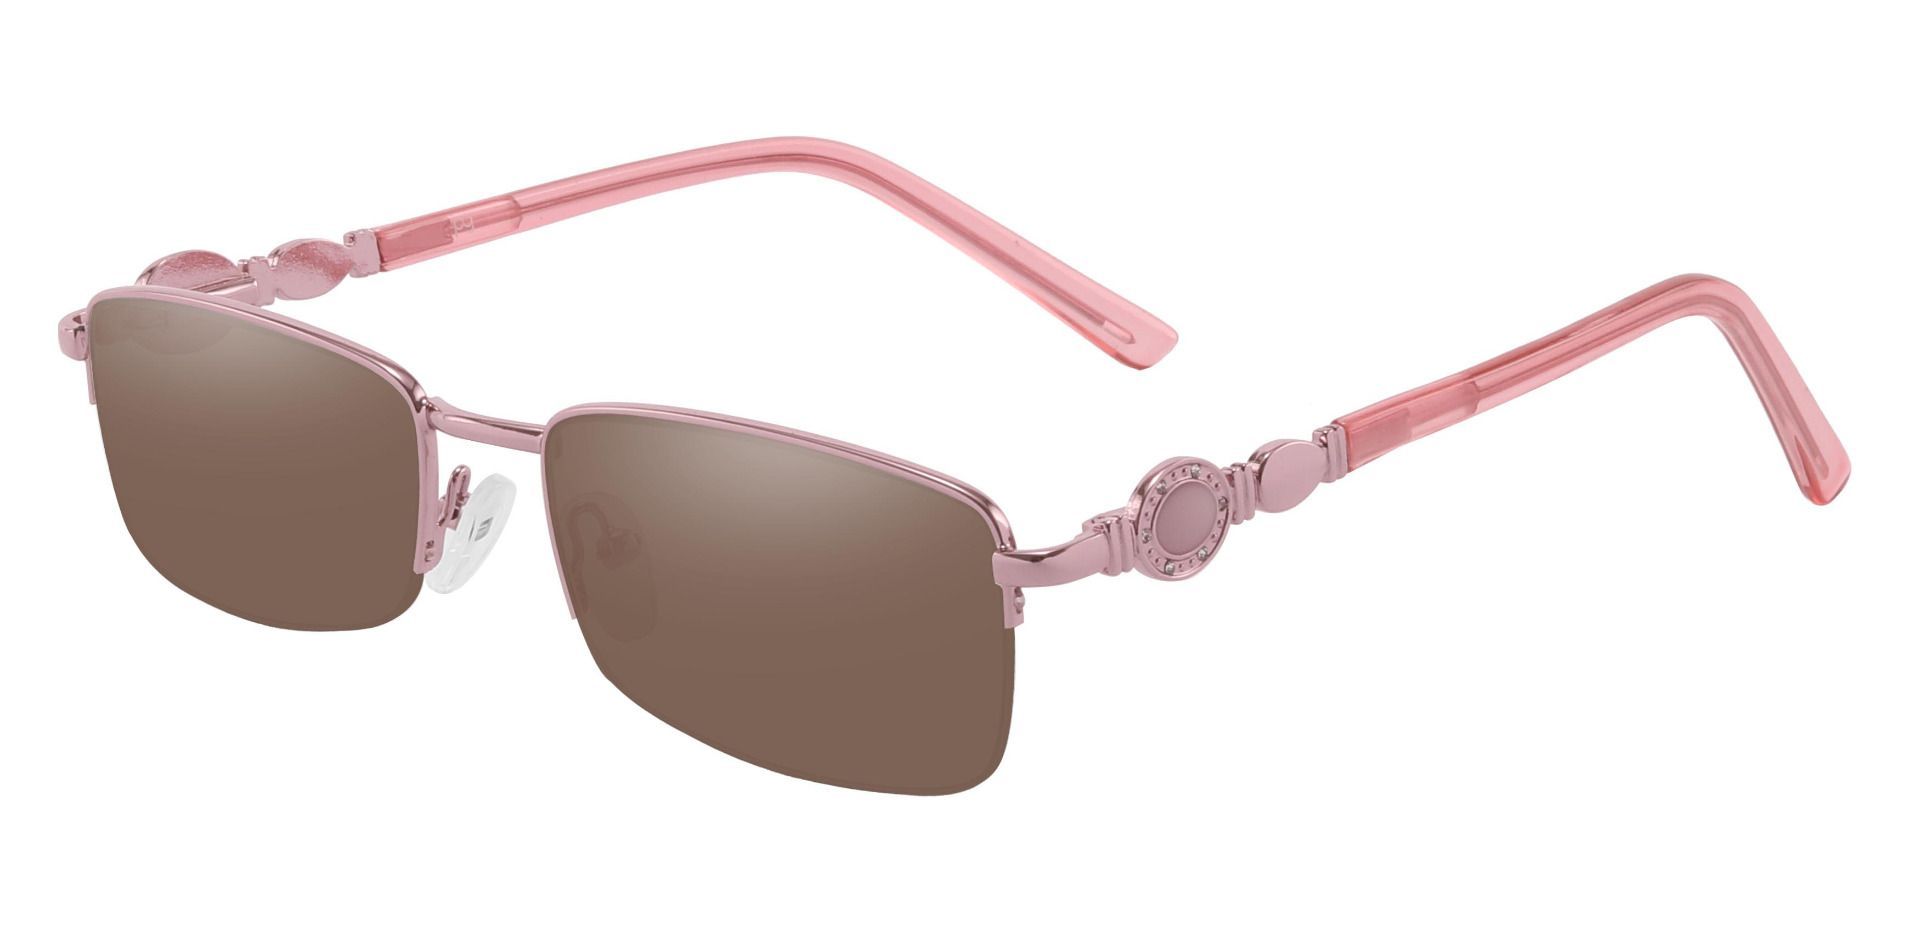 Crowley Rectangle Progressive Sunglasses - Pink Frame With Brown Lenses